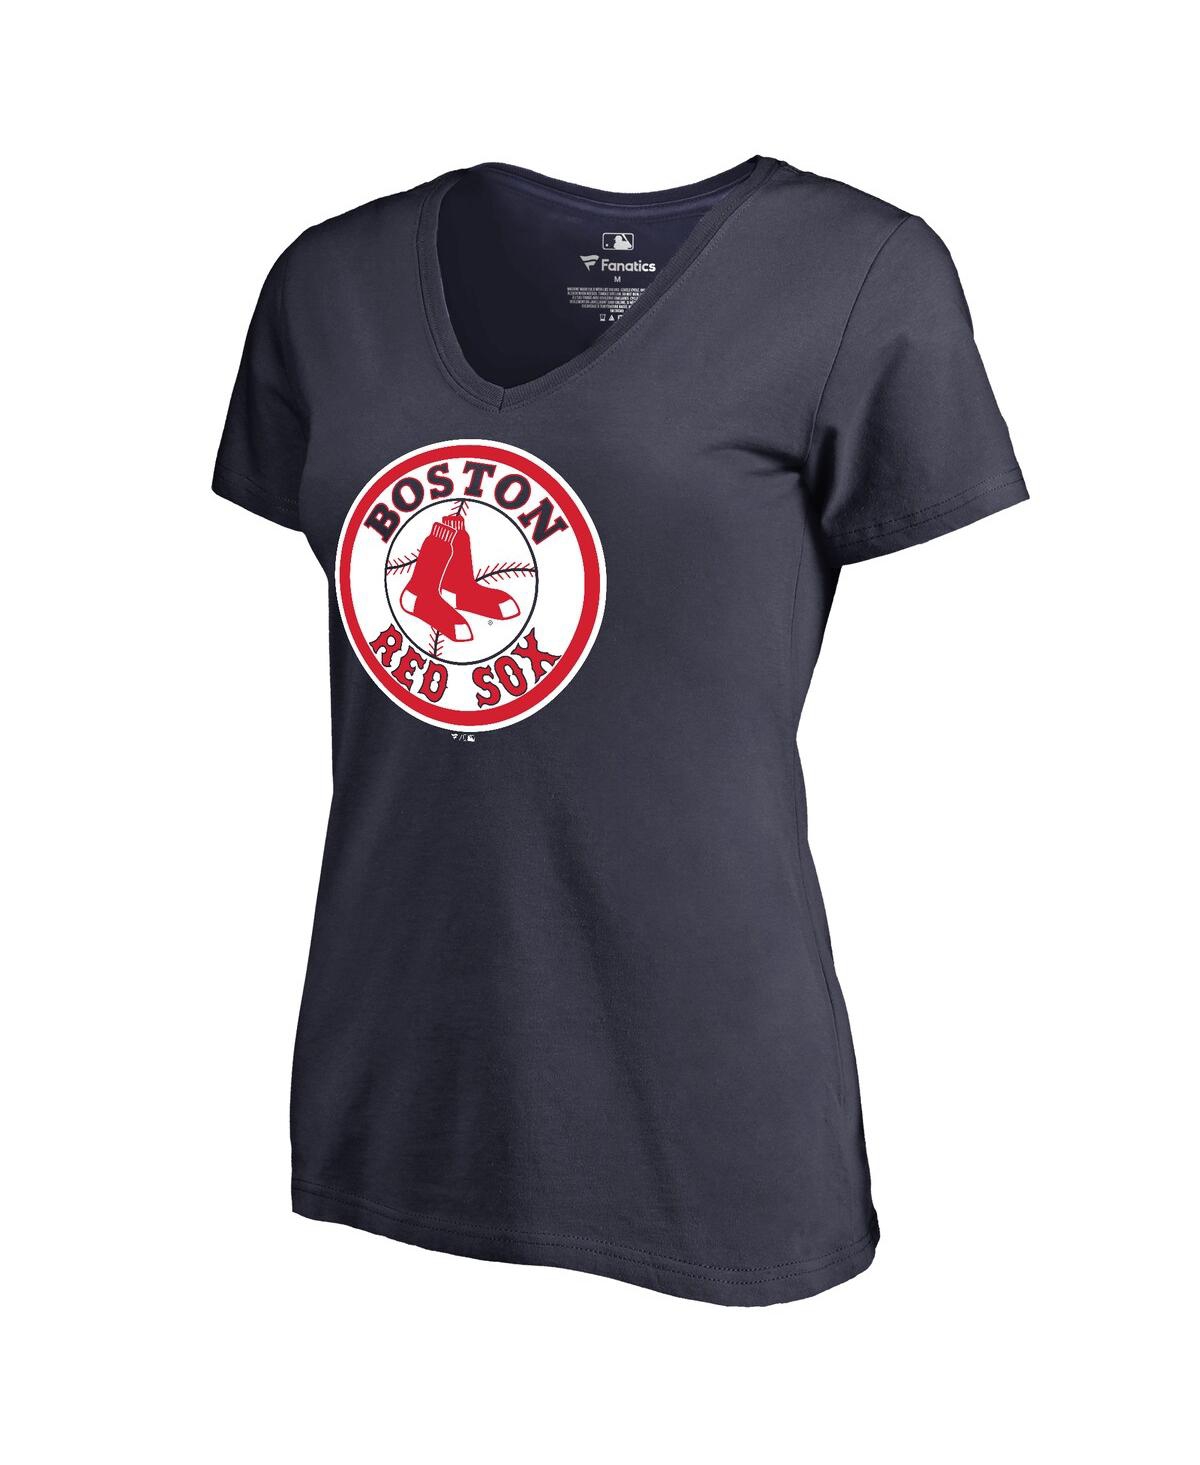 Women's Fanatics Navy Boston Red Sox Cooperstown Collection Forbes T-shirt - Navy